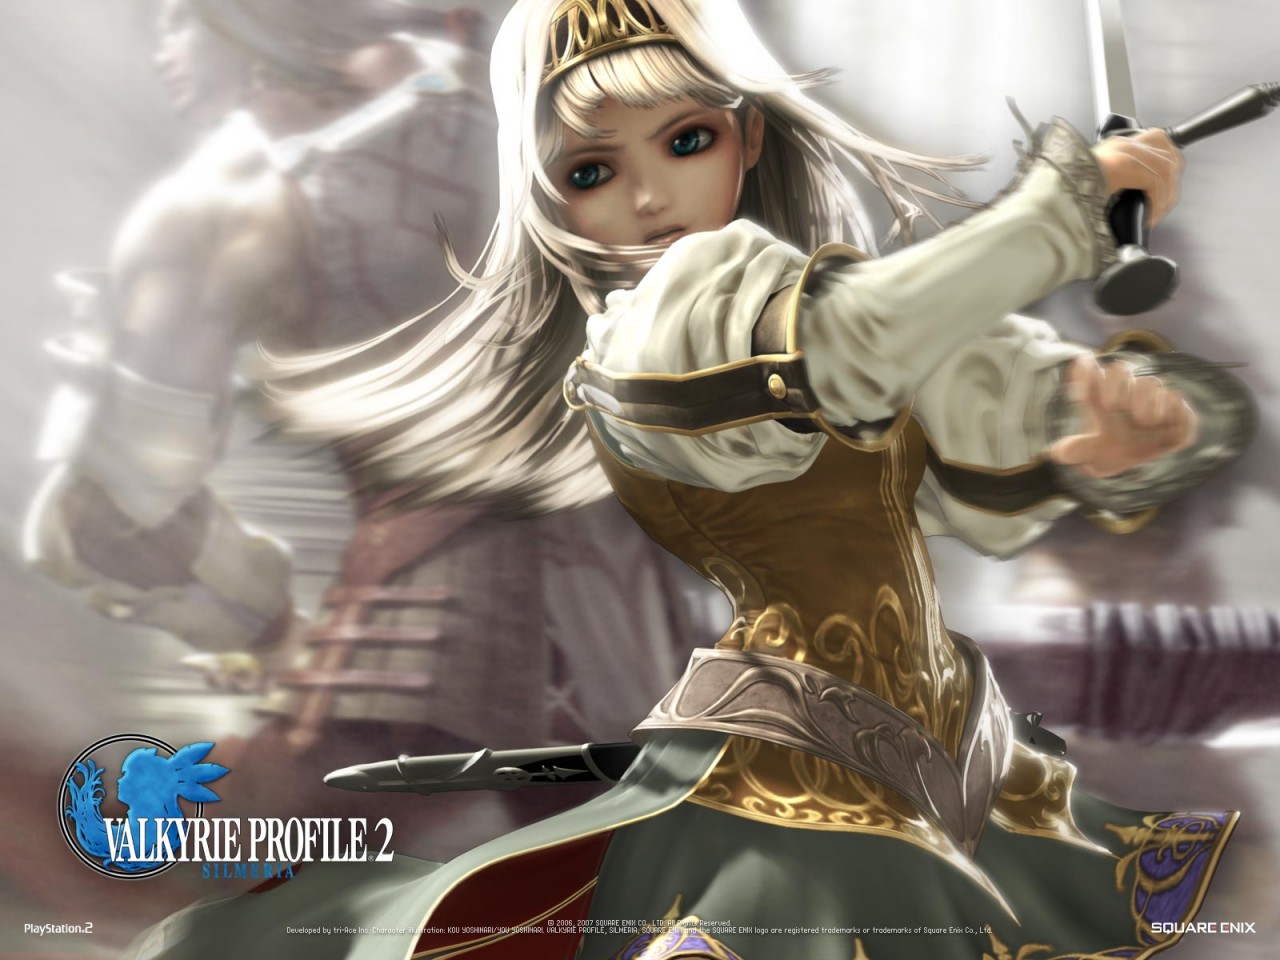 Valkyrie Profile 2: Simeria High Quality Background on Wallpapers Vista